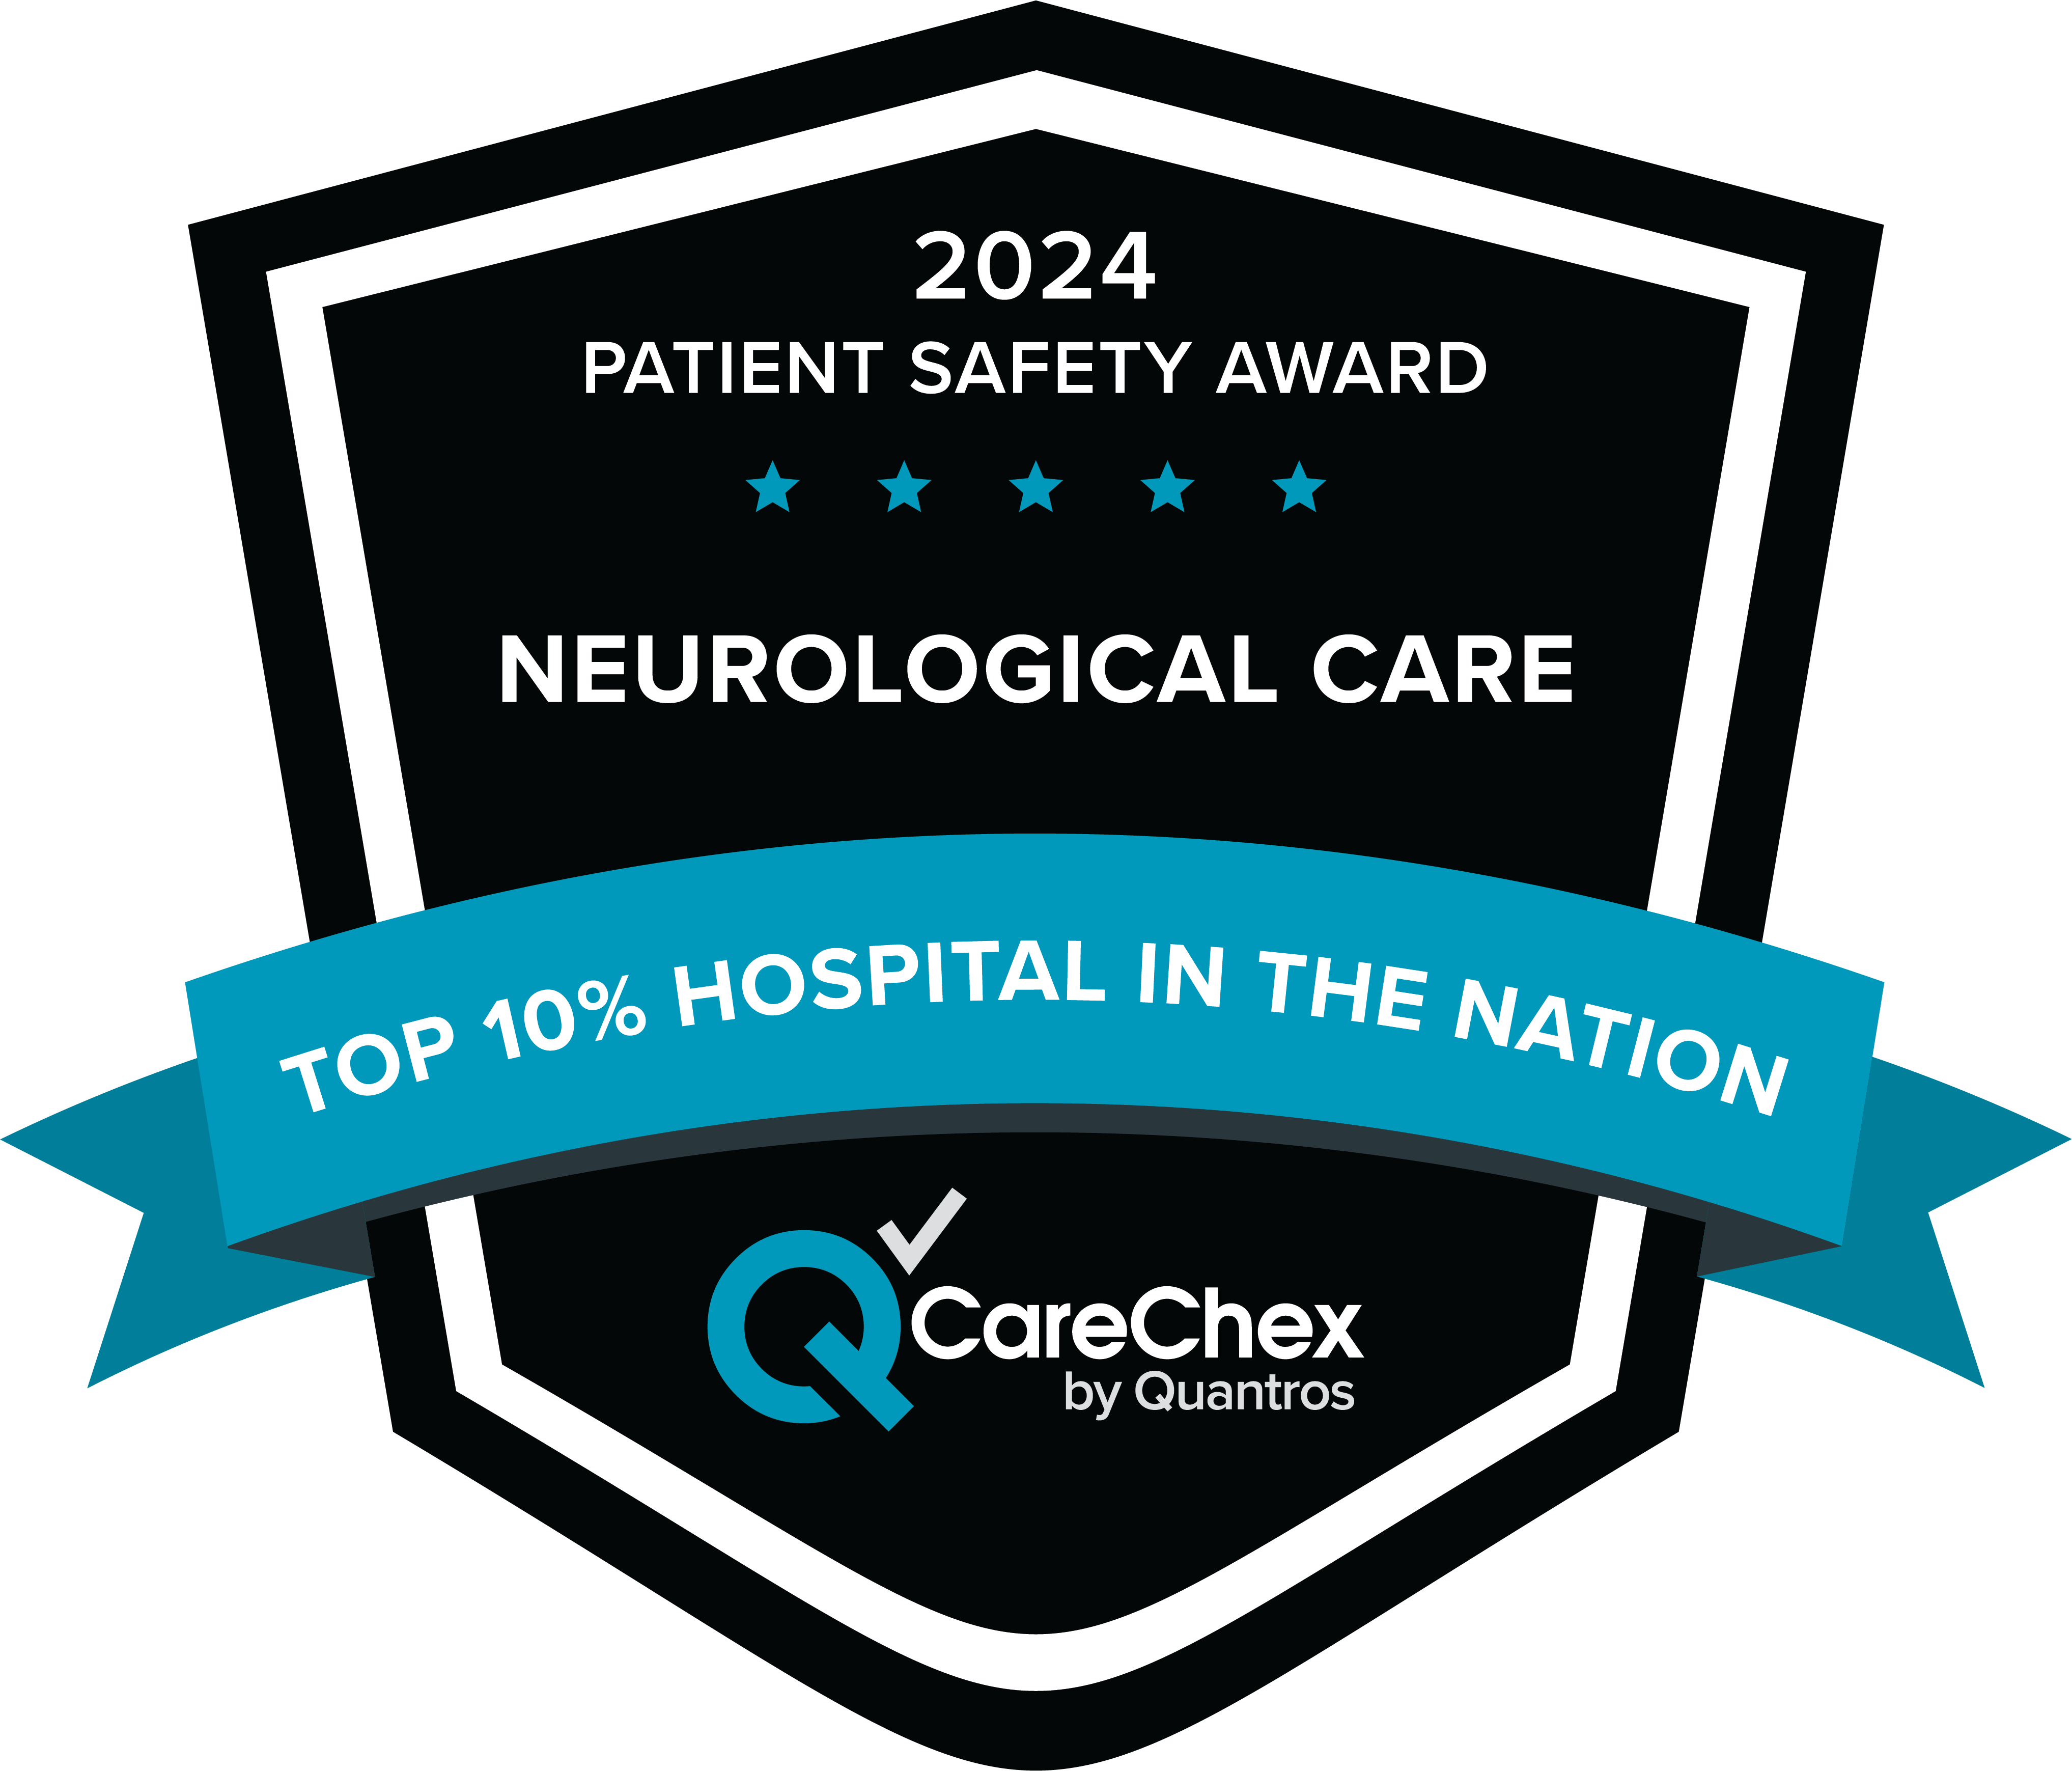 Award badge for Top 10% Hospital in the Nation for Patient Safety in Neurological Care – 2024 CareChex by Quantros